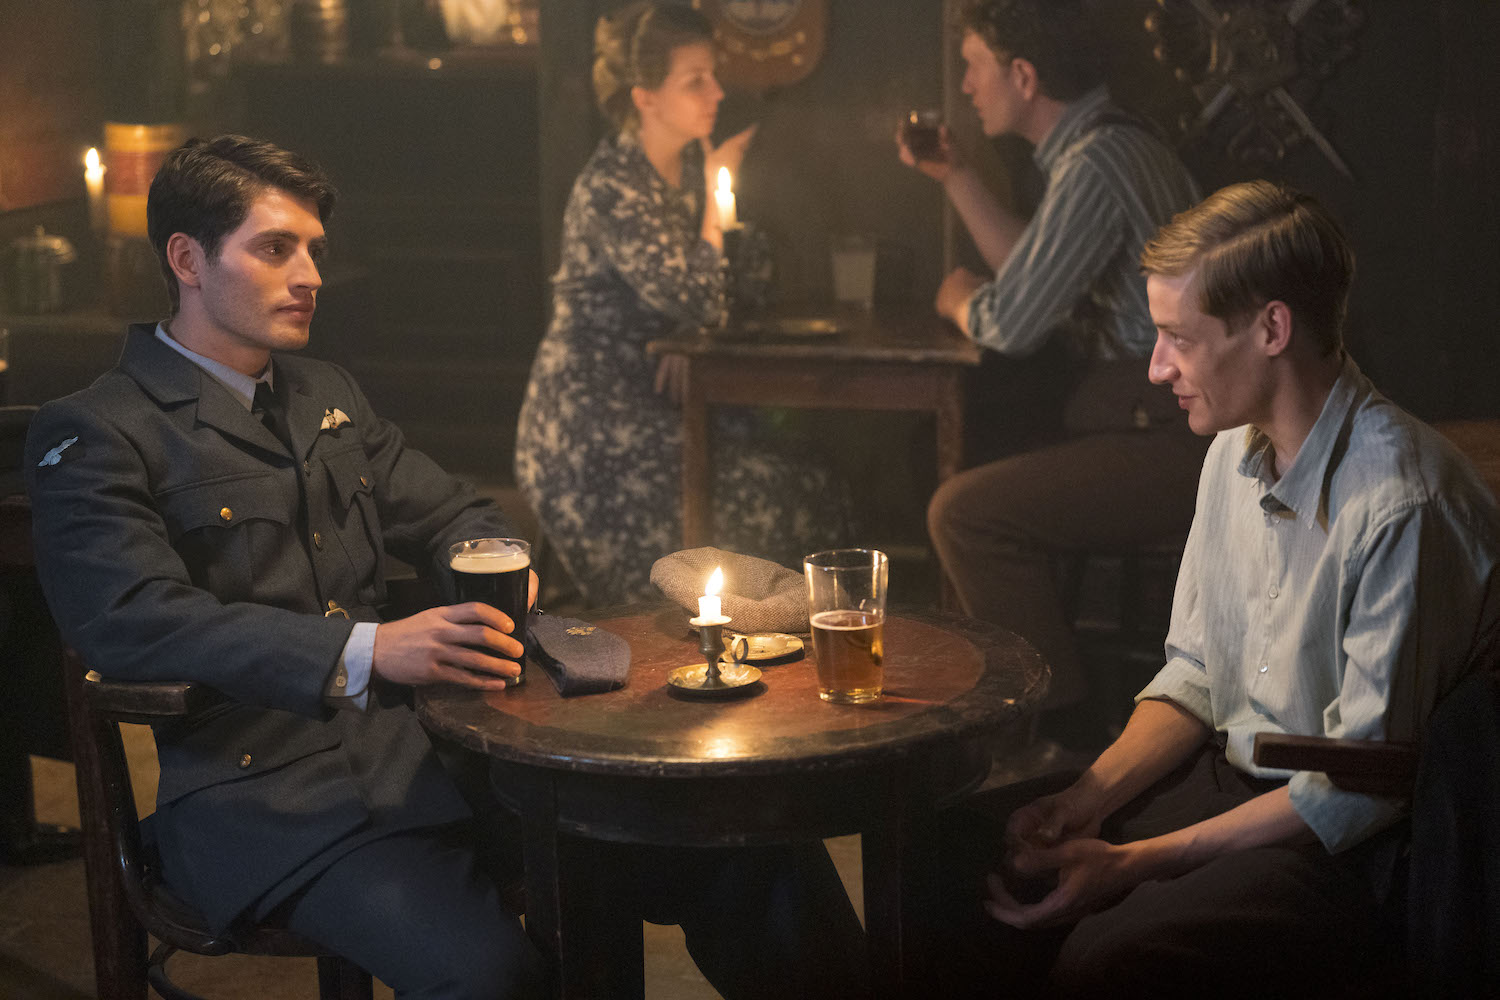 Picture shows: A reunion in a candle-lit pub between Grzegorz (Mateusz Więcławek) and David (Gregg Sulkin), who's made it safely home from occupied France.